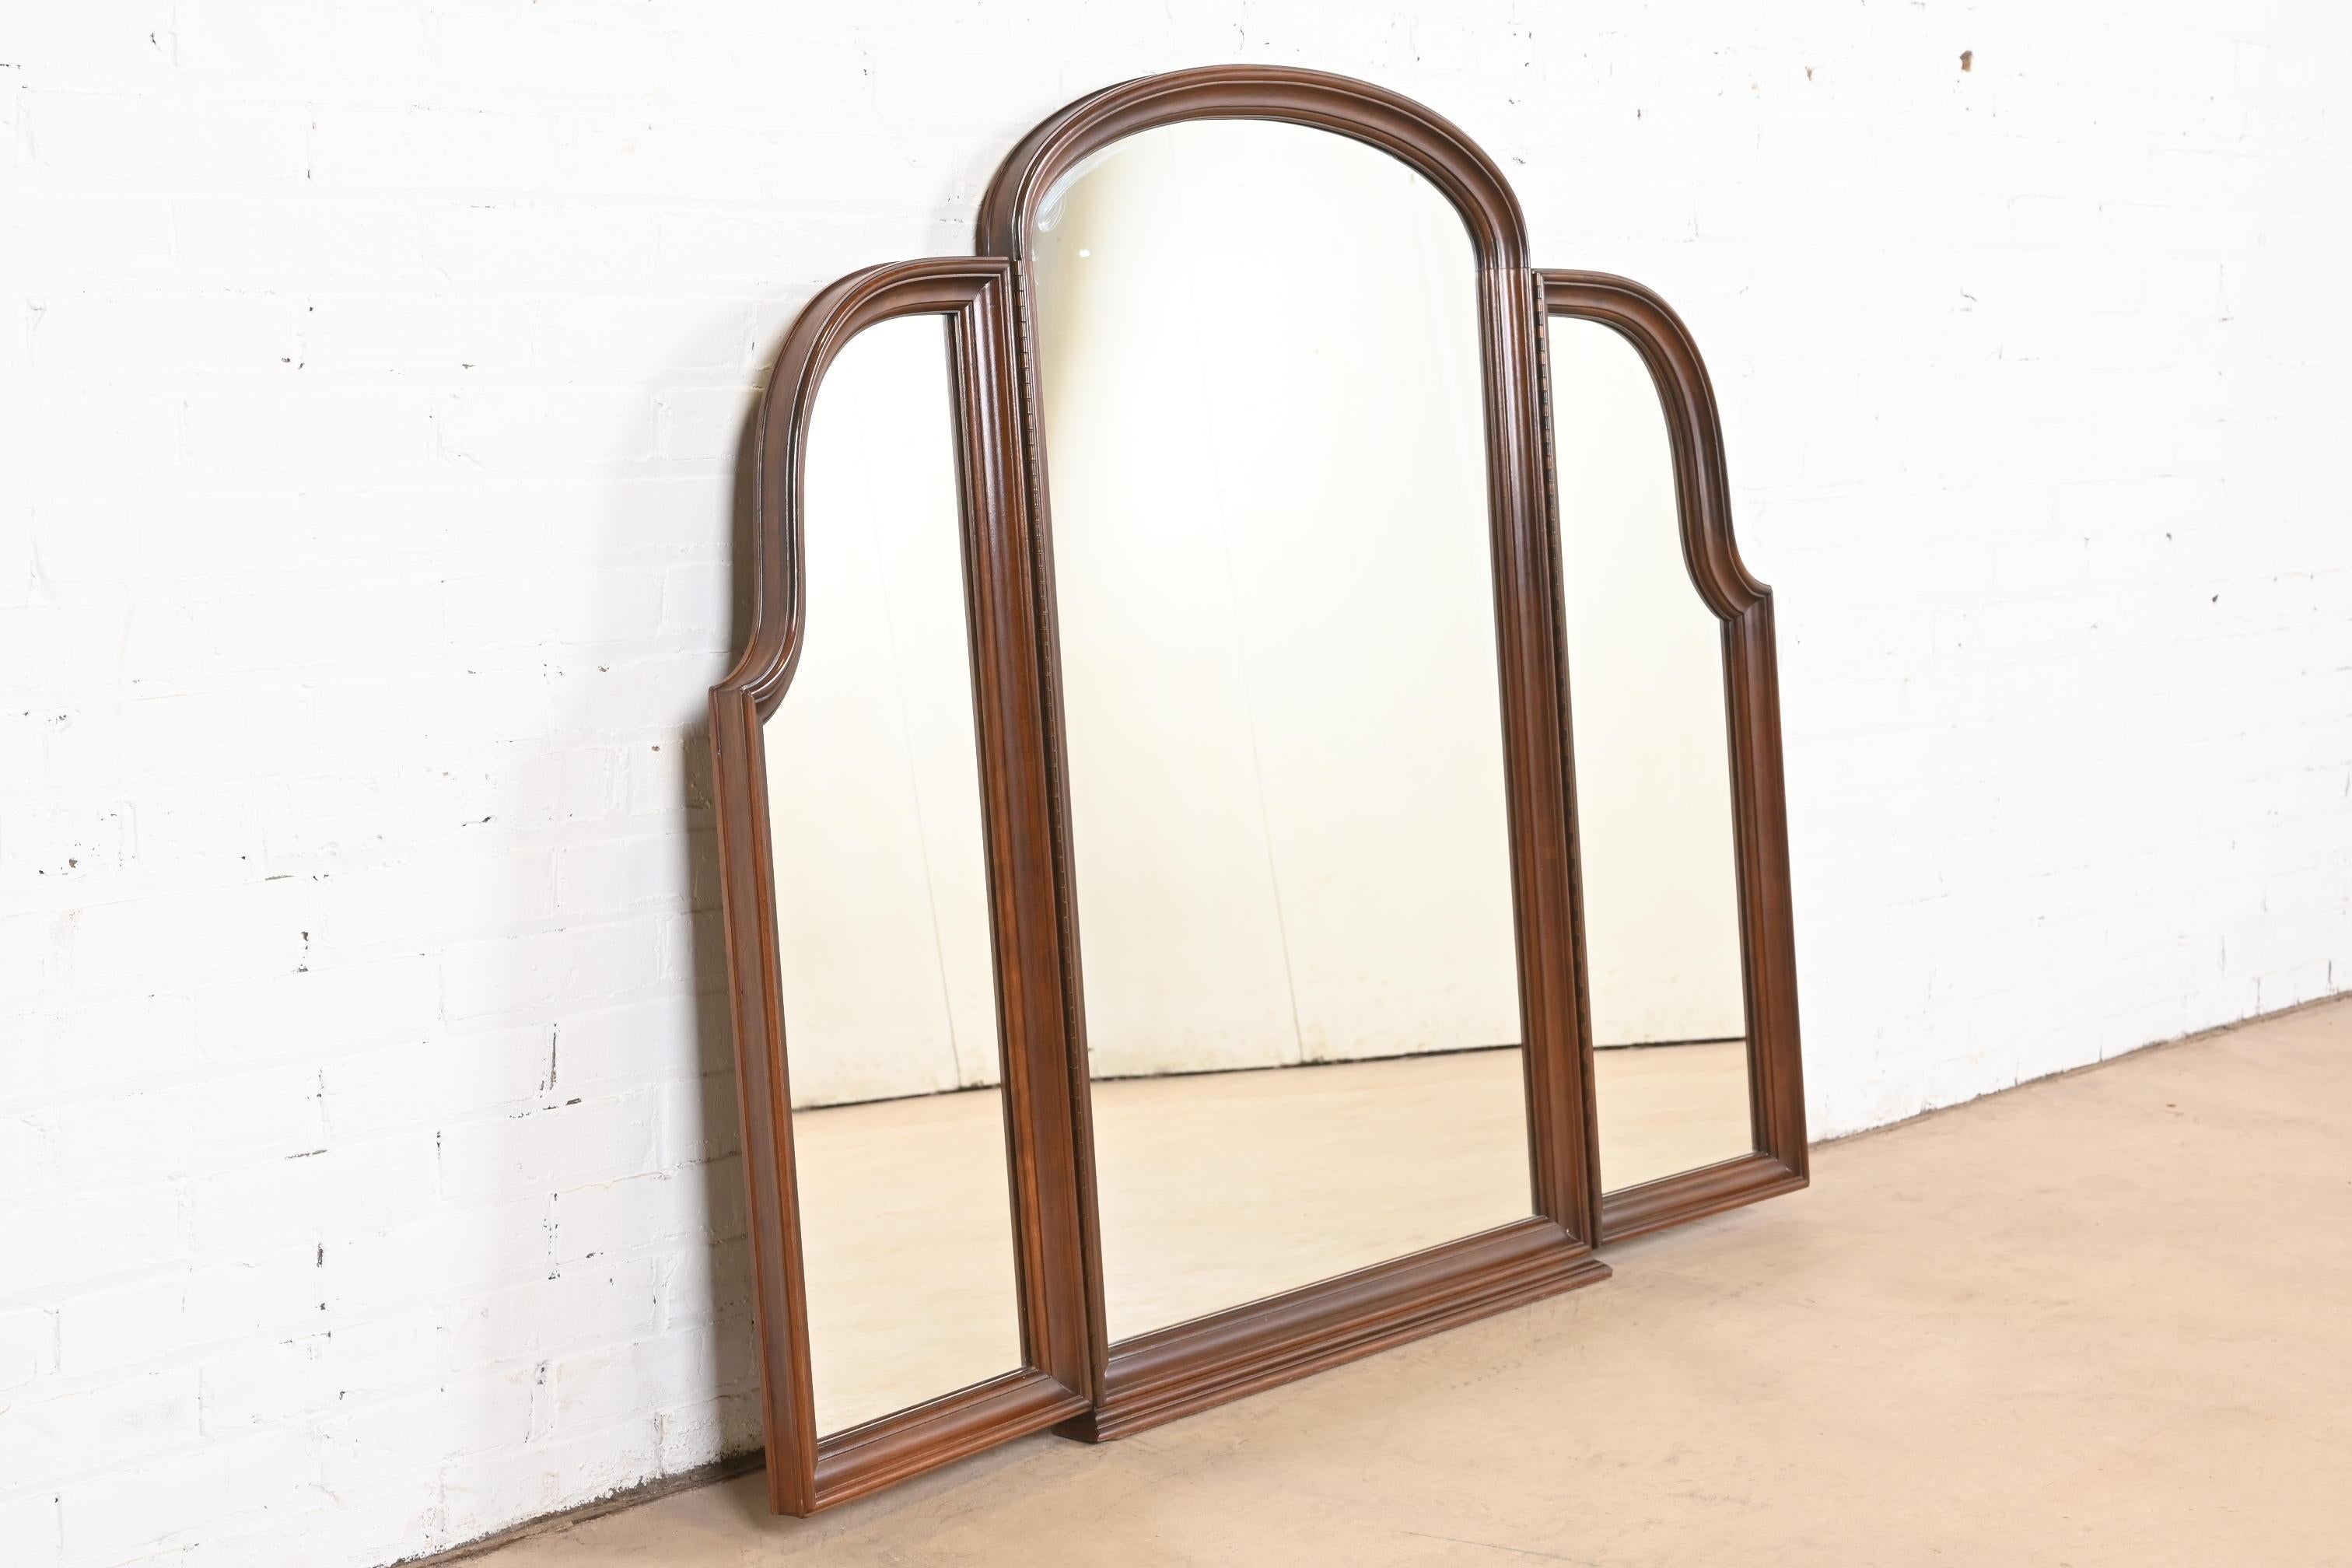 A gorgeous Georgian or Chippendale style carved cherry wood framed tri-fold triple mirror

USA, Circa 1980s

Measures: 42